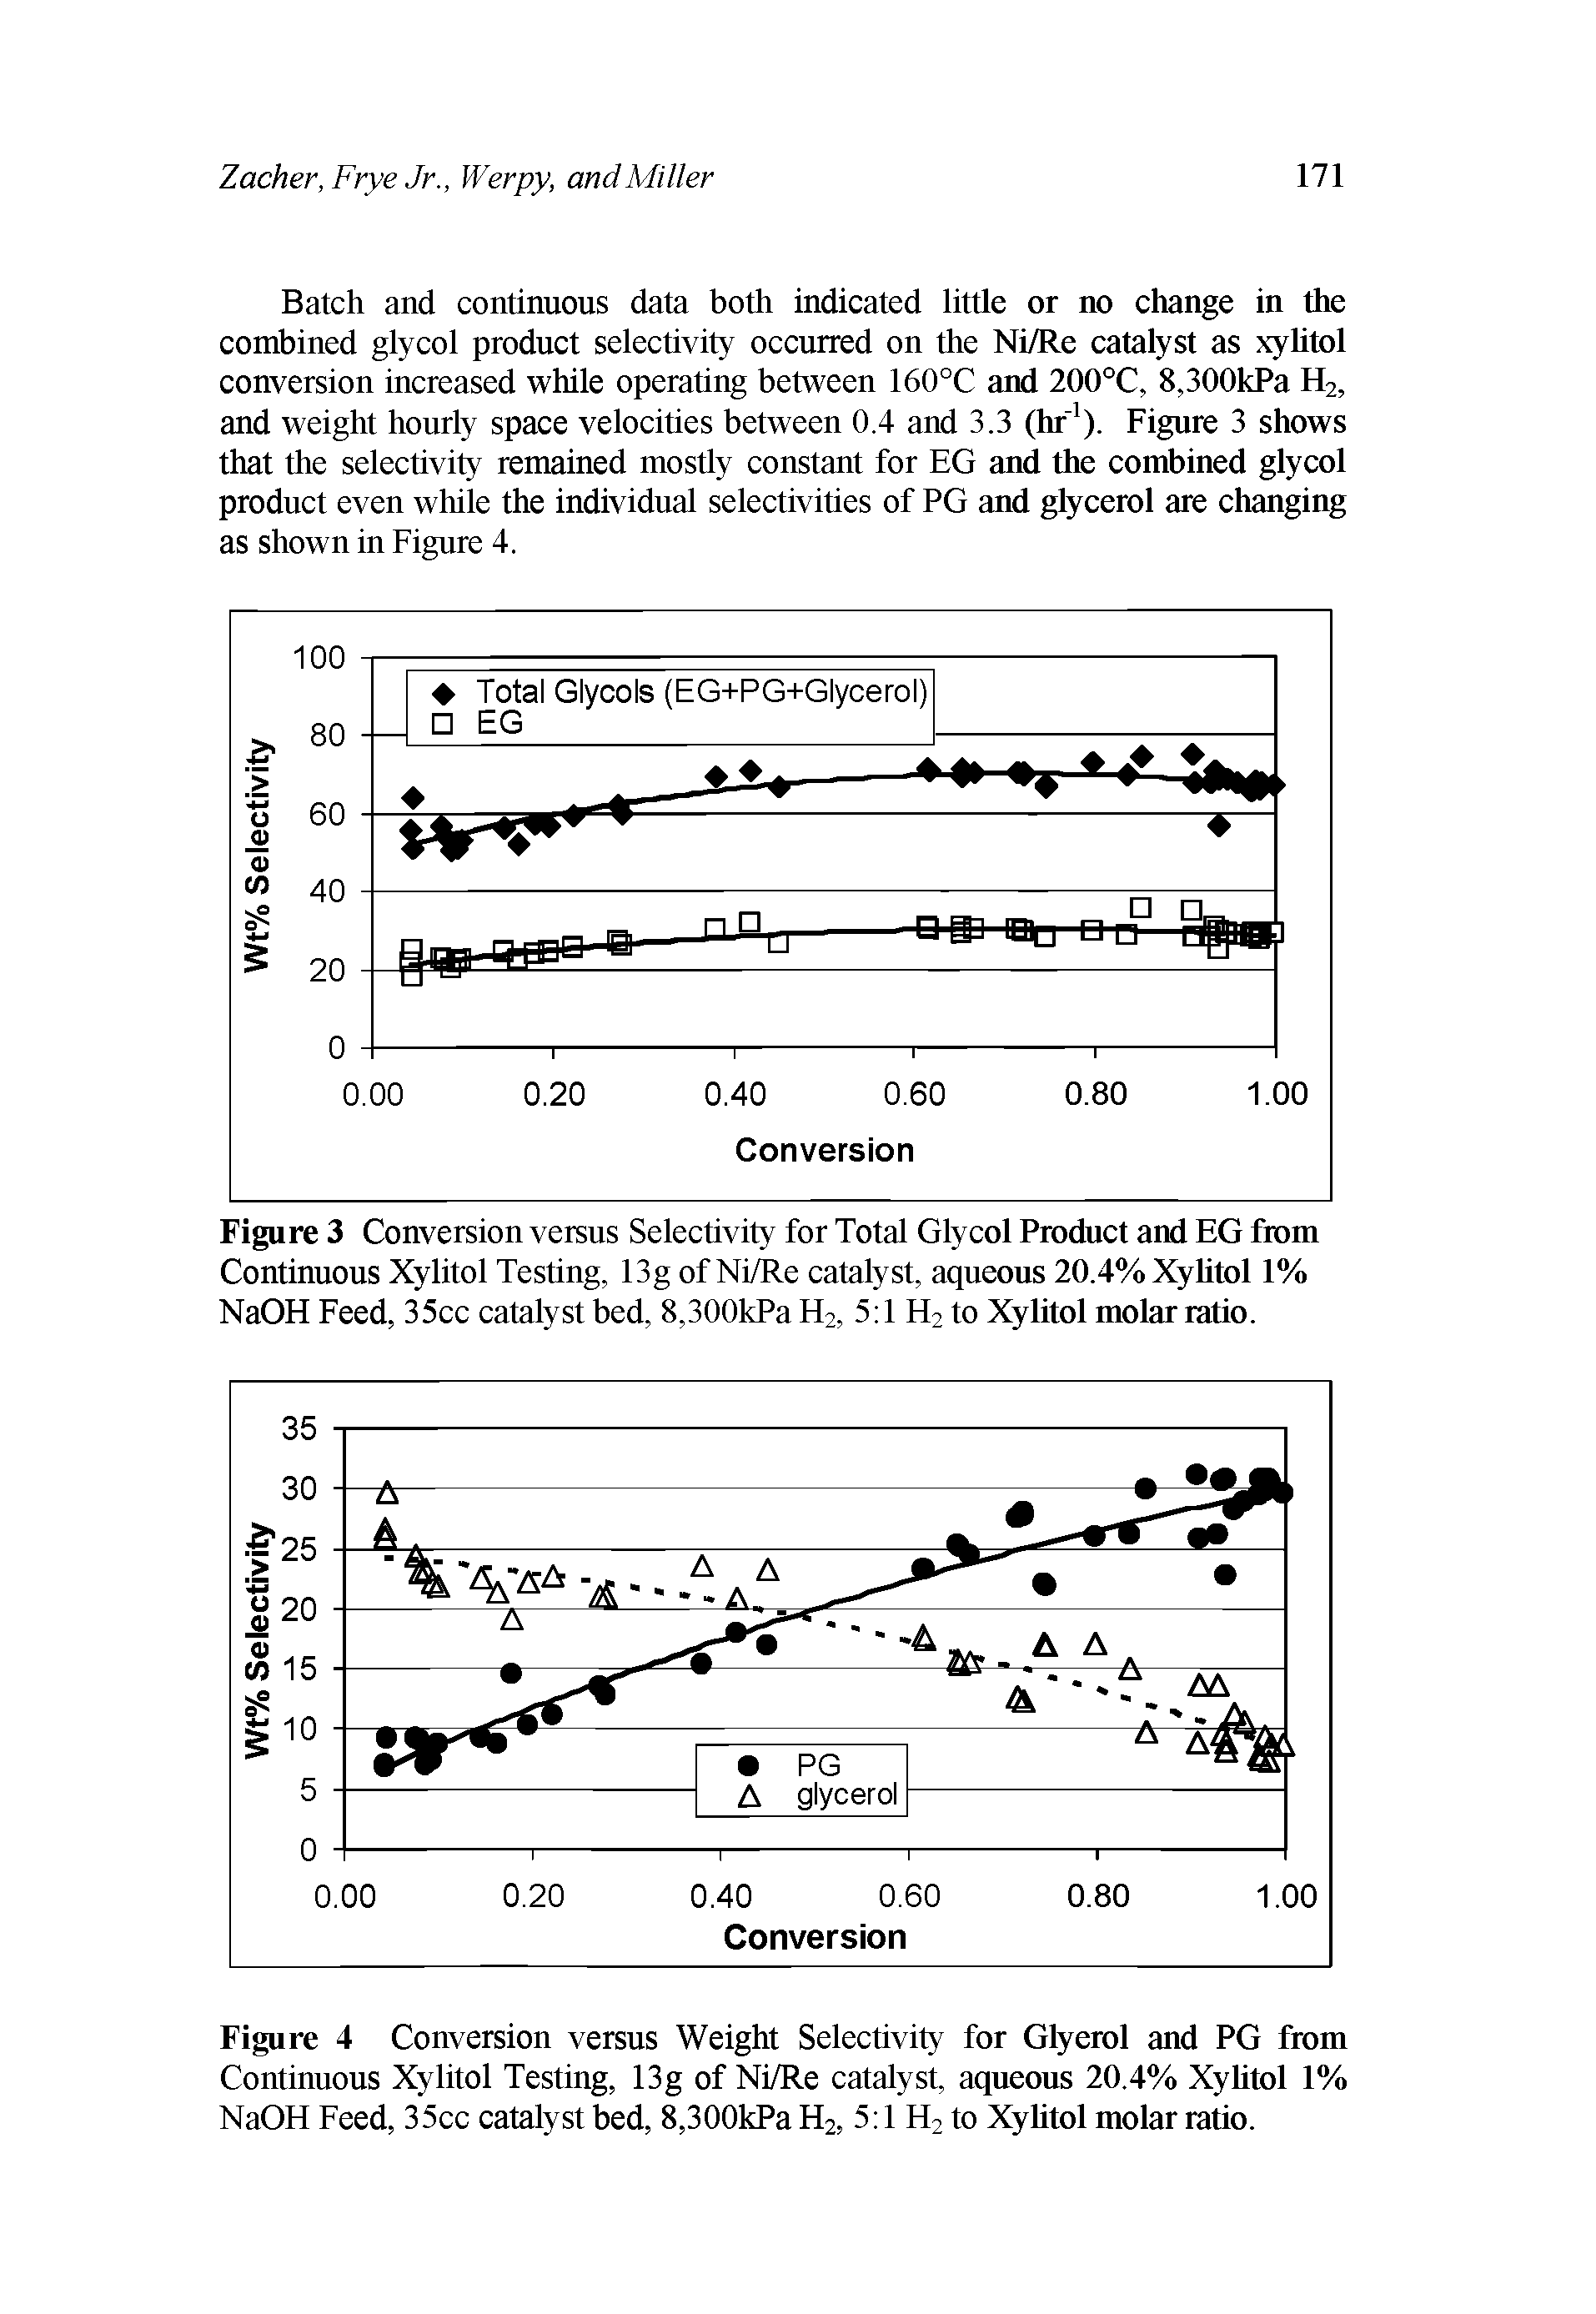 Figure 3 Conversion versus Selectivity for Total Glycol Product and EG from Continuous Xylitol Testing, 13g of Ni/Re catalyst, aqueous 20.4% Xylitol 1% NaOH Feed, 35cc catalyst bed, 8,300kPaH2, 5 1 H2 to Xylitol molar ratio.